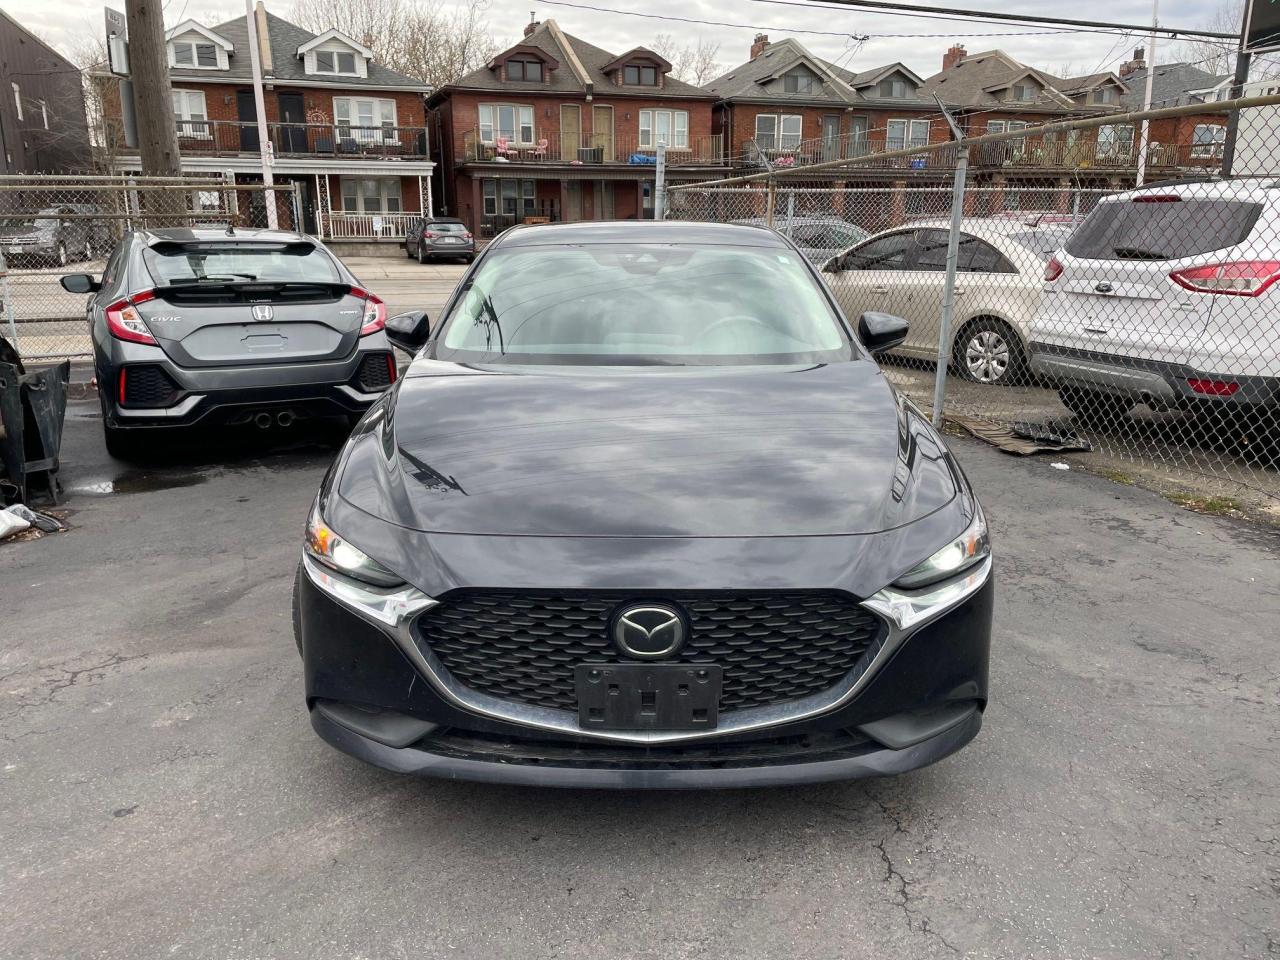 2019 Mazda MAZDA3 GS *AWD, SAFETY FEATURES, BACKUP CAM, LOW KM* - Photo #2